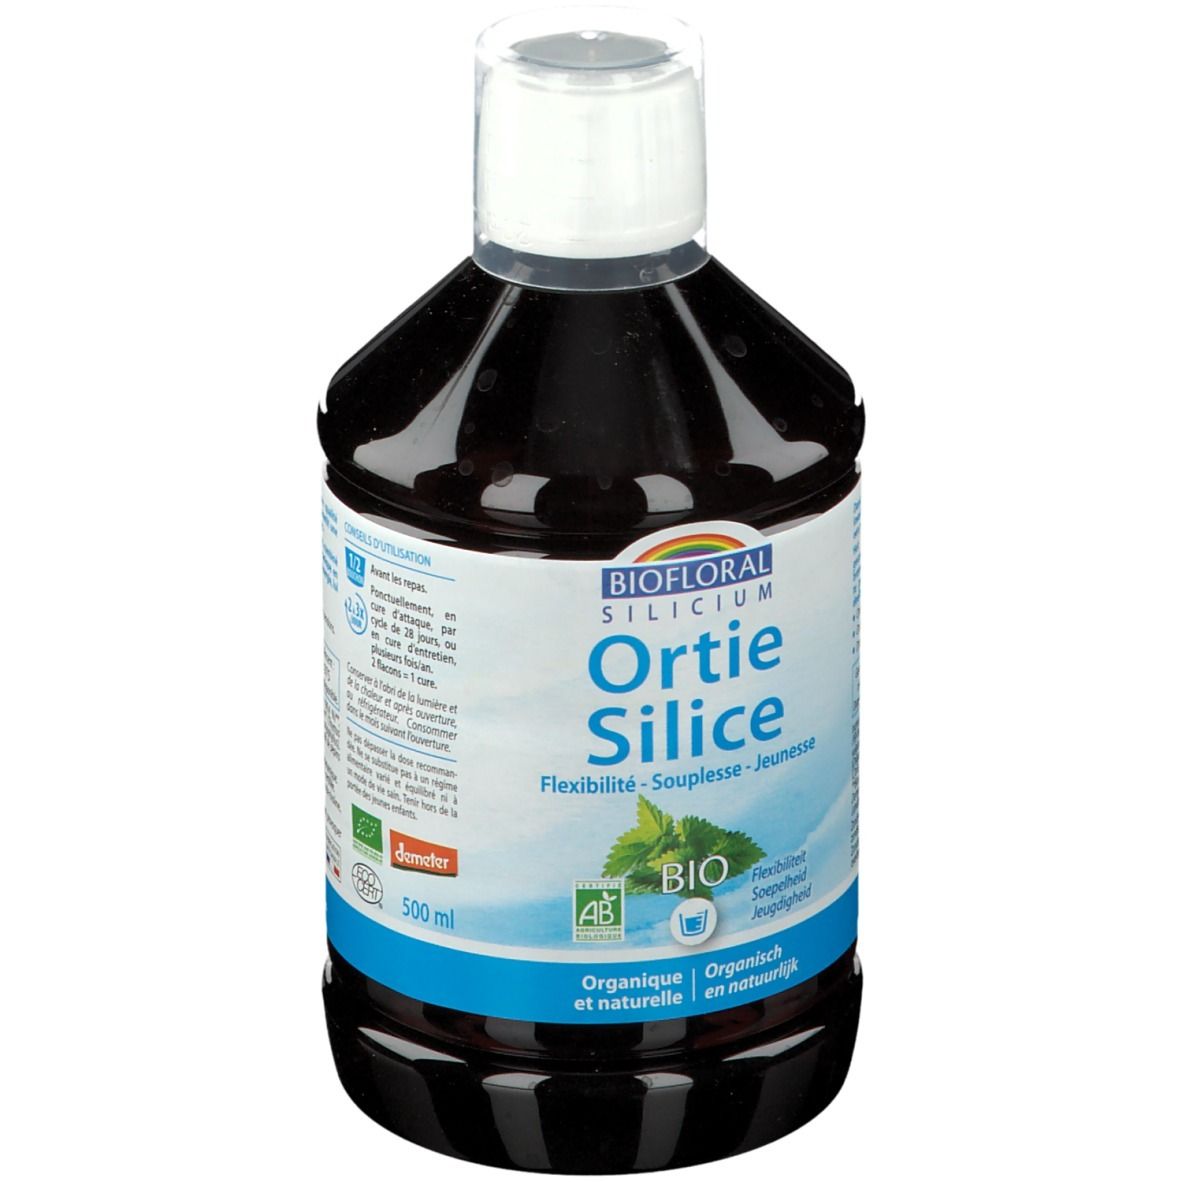 BIOFLORAL Ortie-Silice